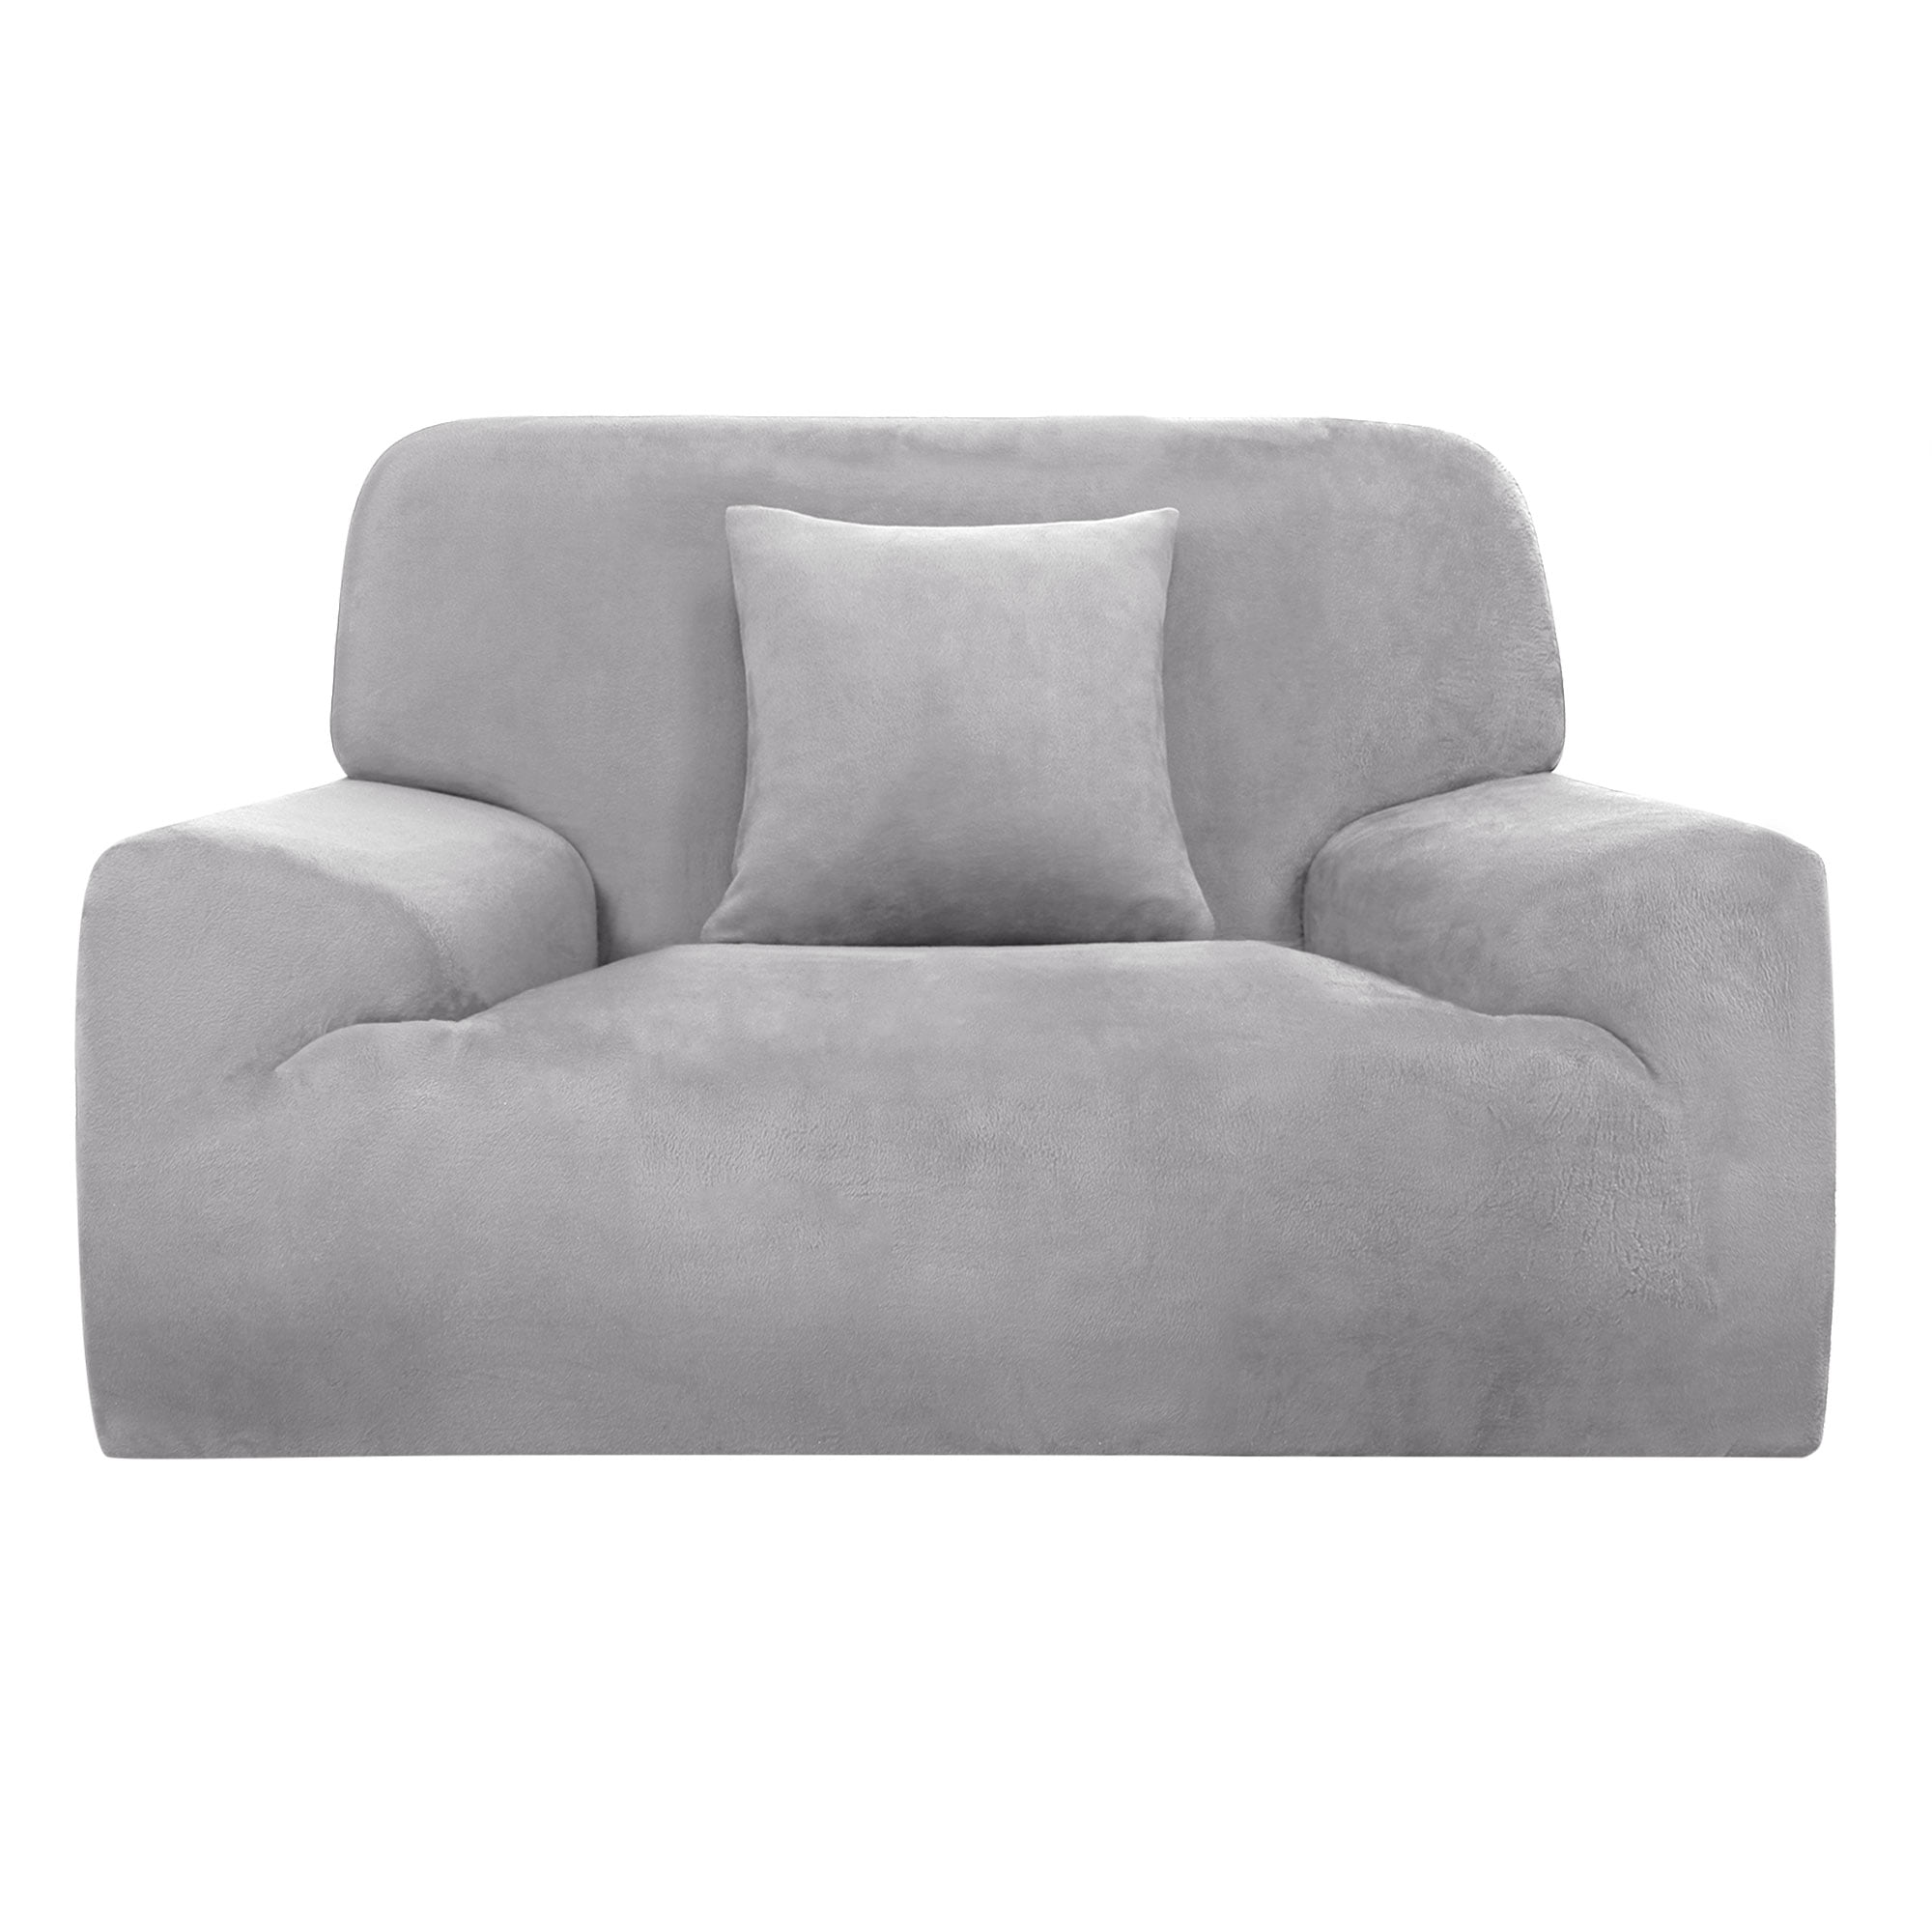 Details about   1/2/3/4 Seater Sofa Cover Warm Plush Slipcovers Settee Couch Protector 30 Colors 